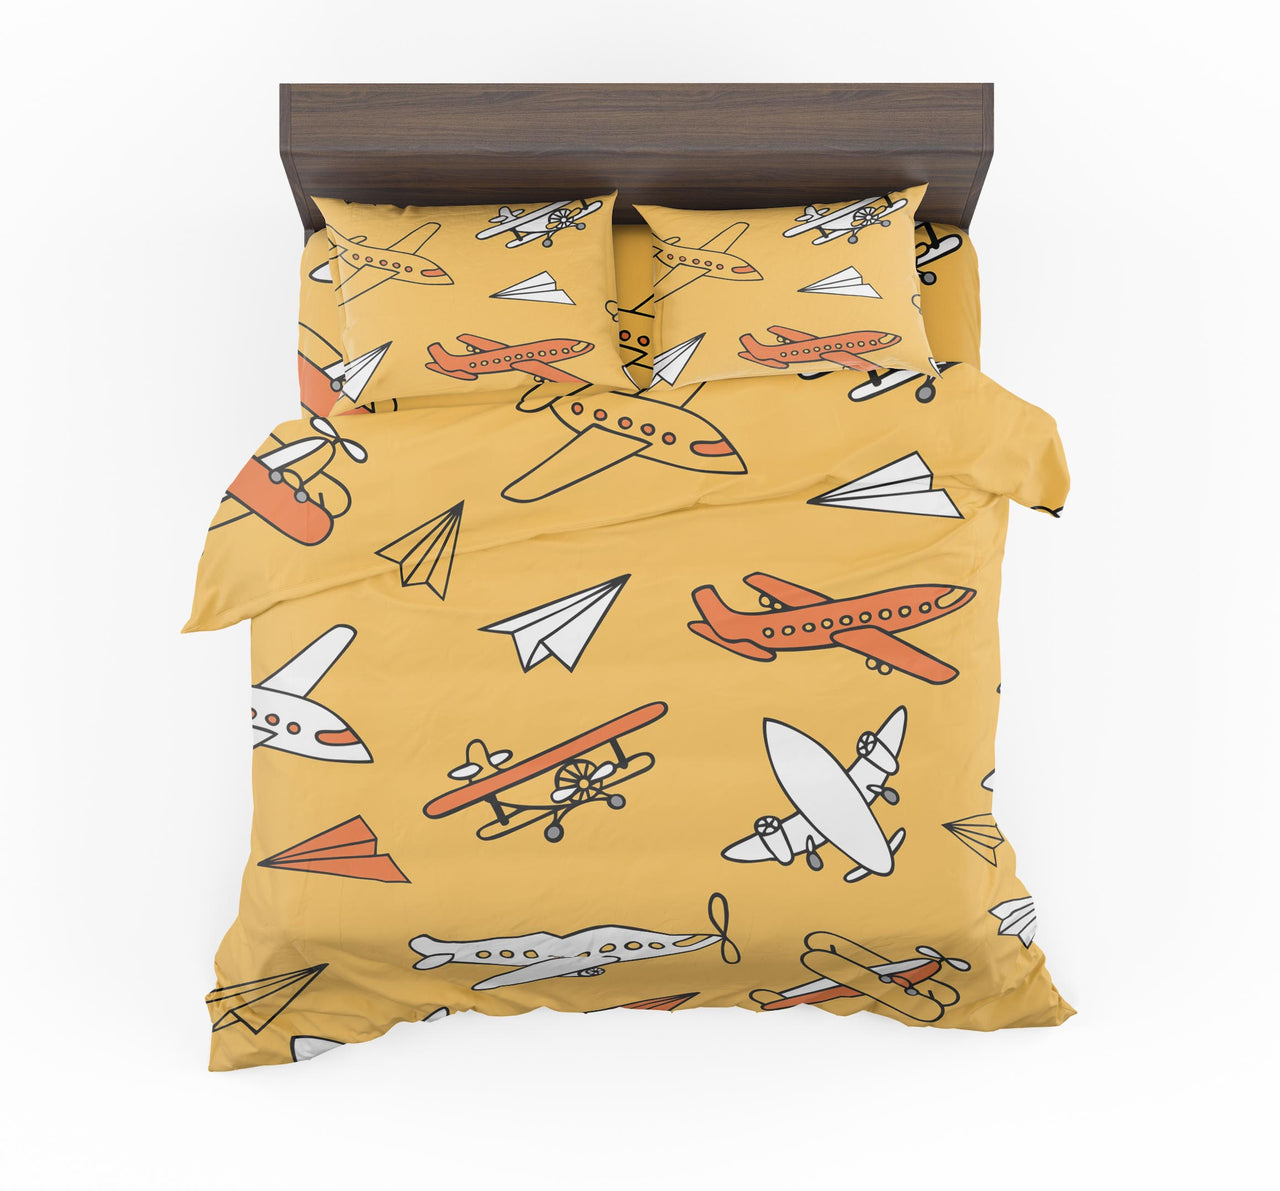 Super Drawings of Airplanes Designed Bedding Sets